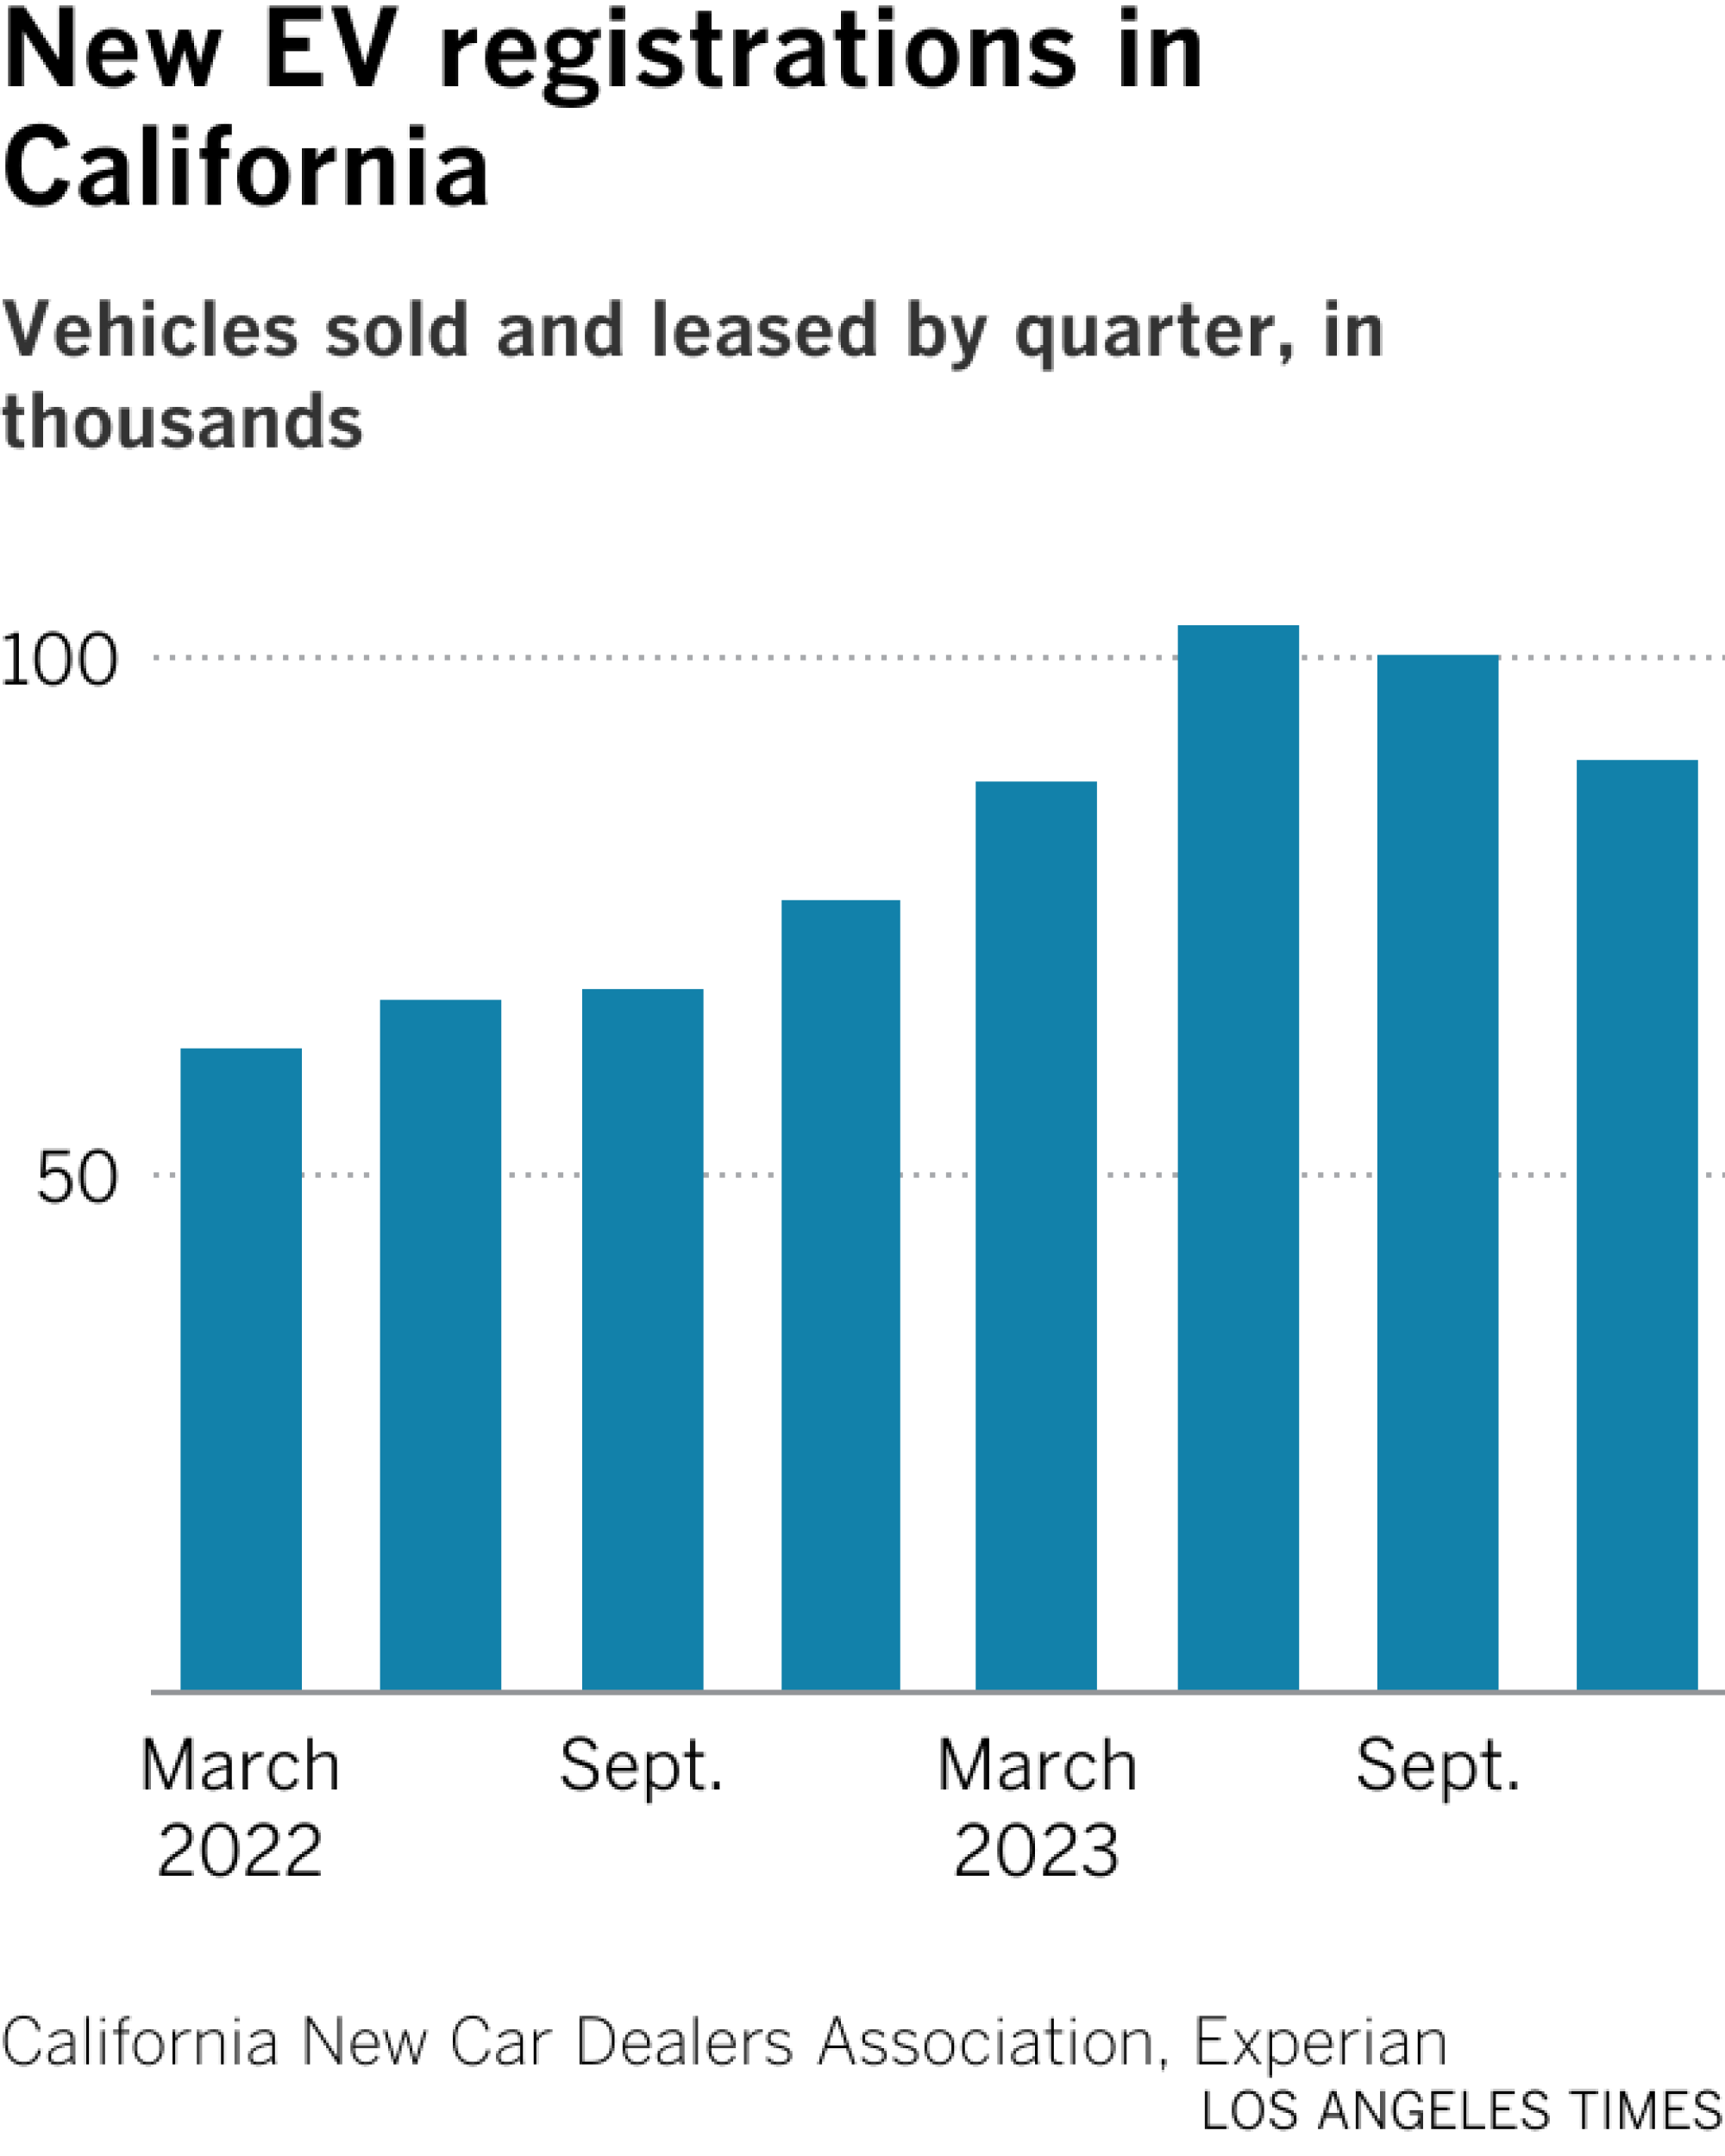 Bar chart shows electric vehicles sold by quarter. In Q2 of 2023, EV sales peaked at 103,000 new registrations. In Q4, sales declined to about 90,000.